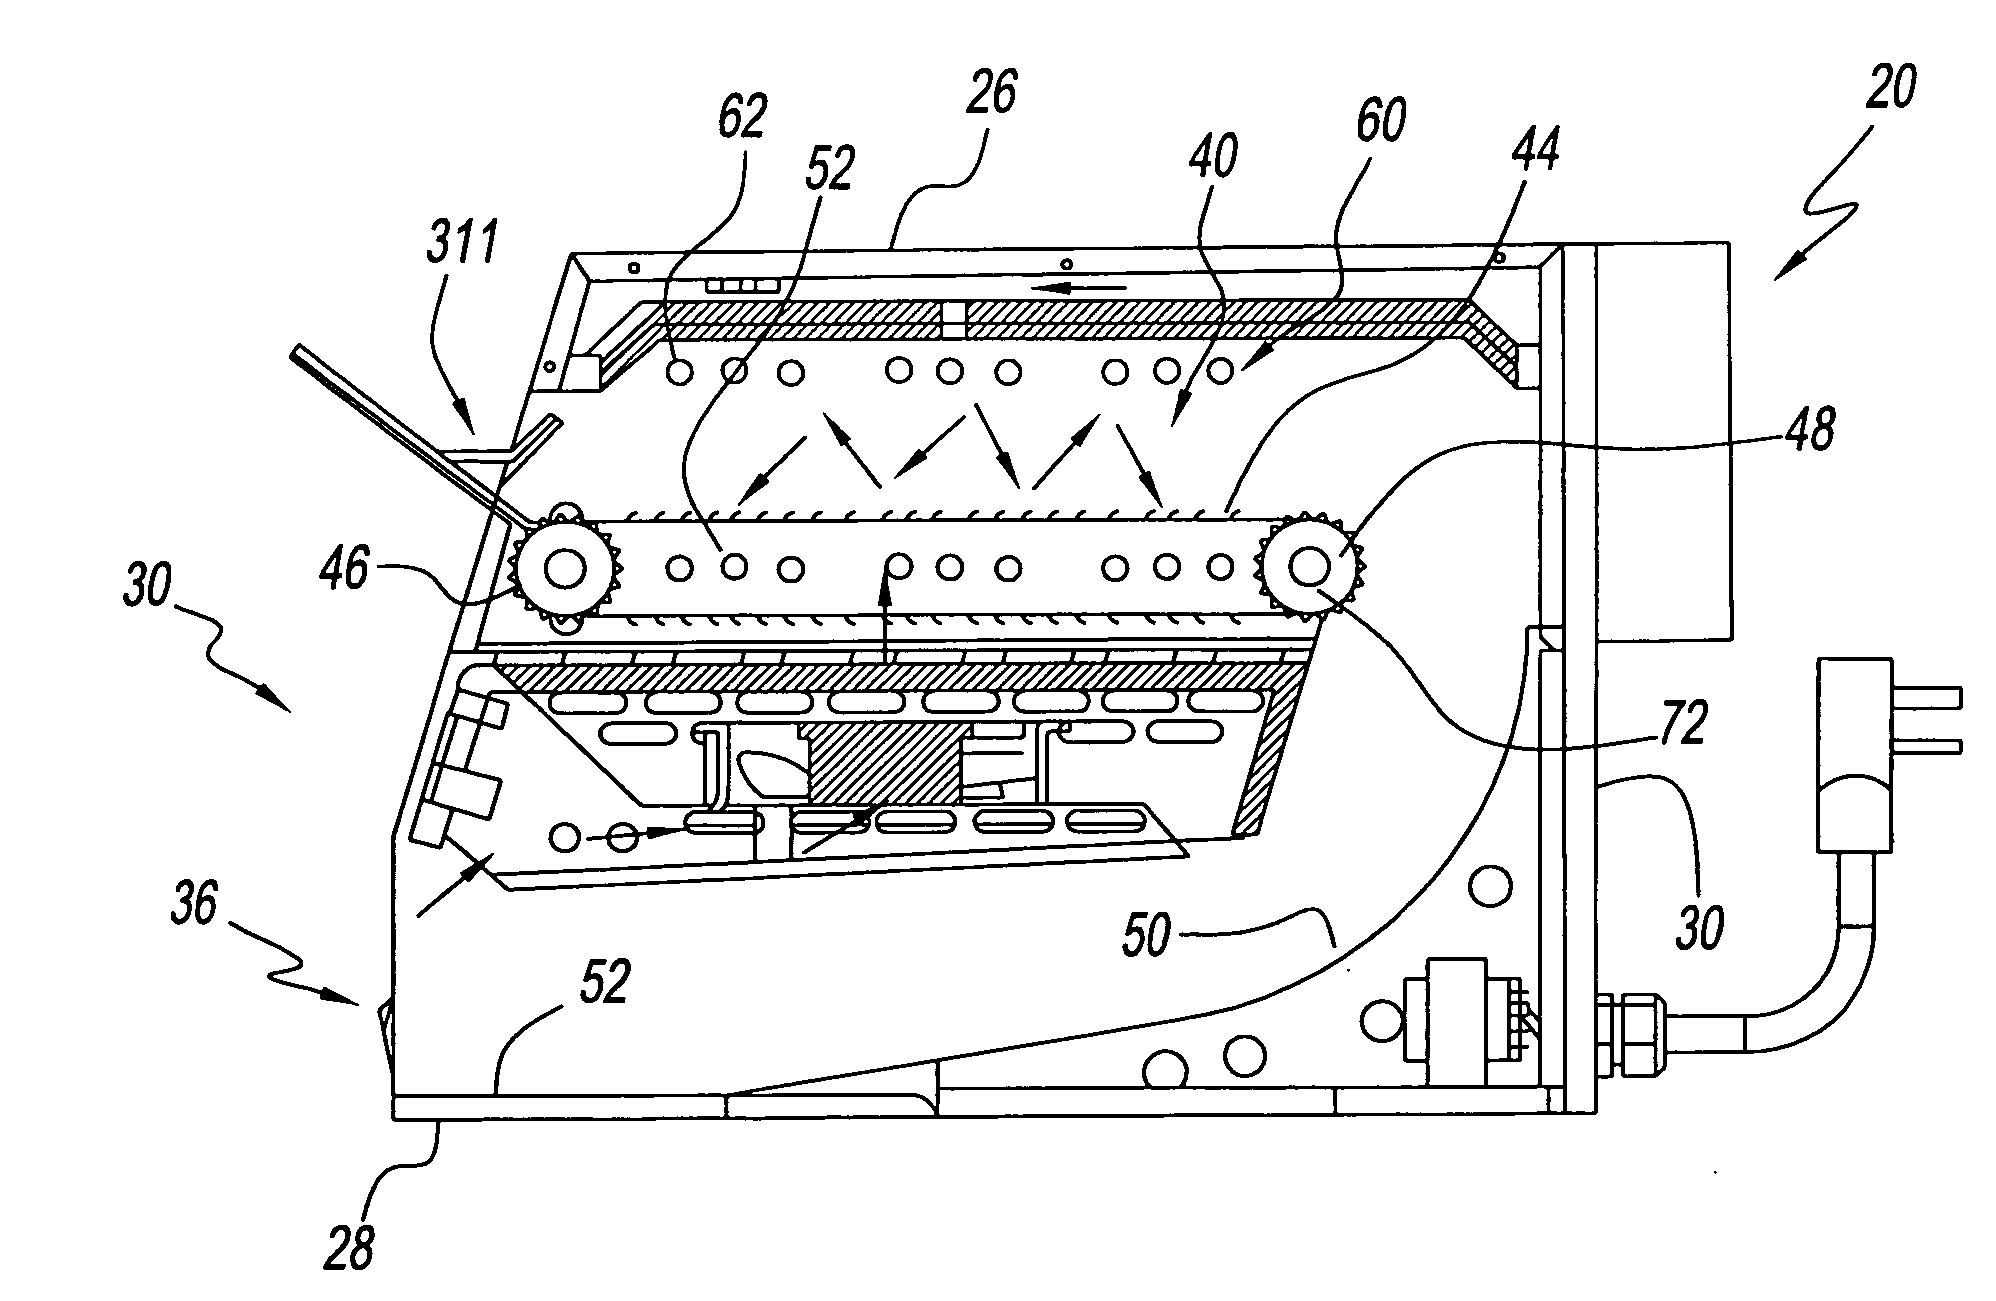 Conveyorized oven and method for uniform cooking